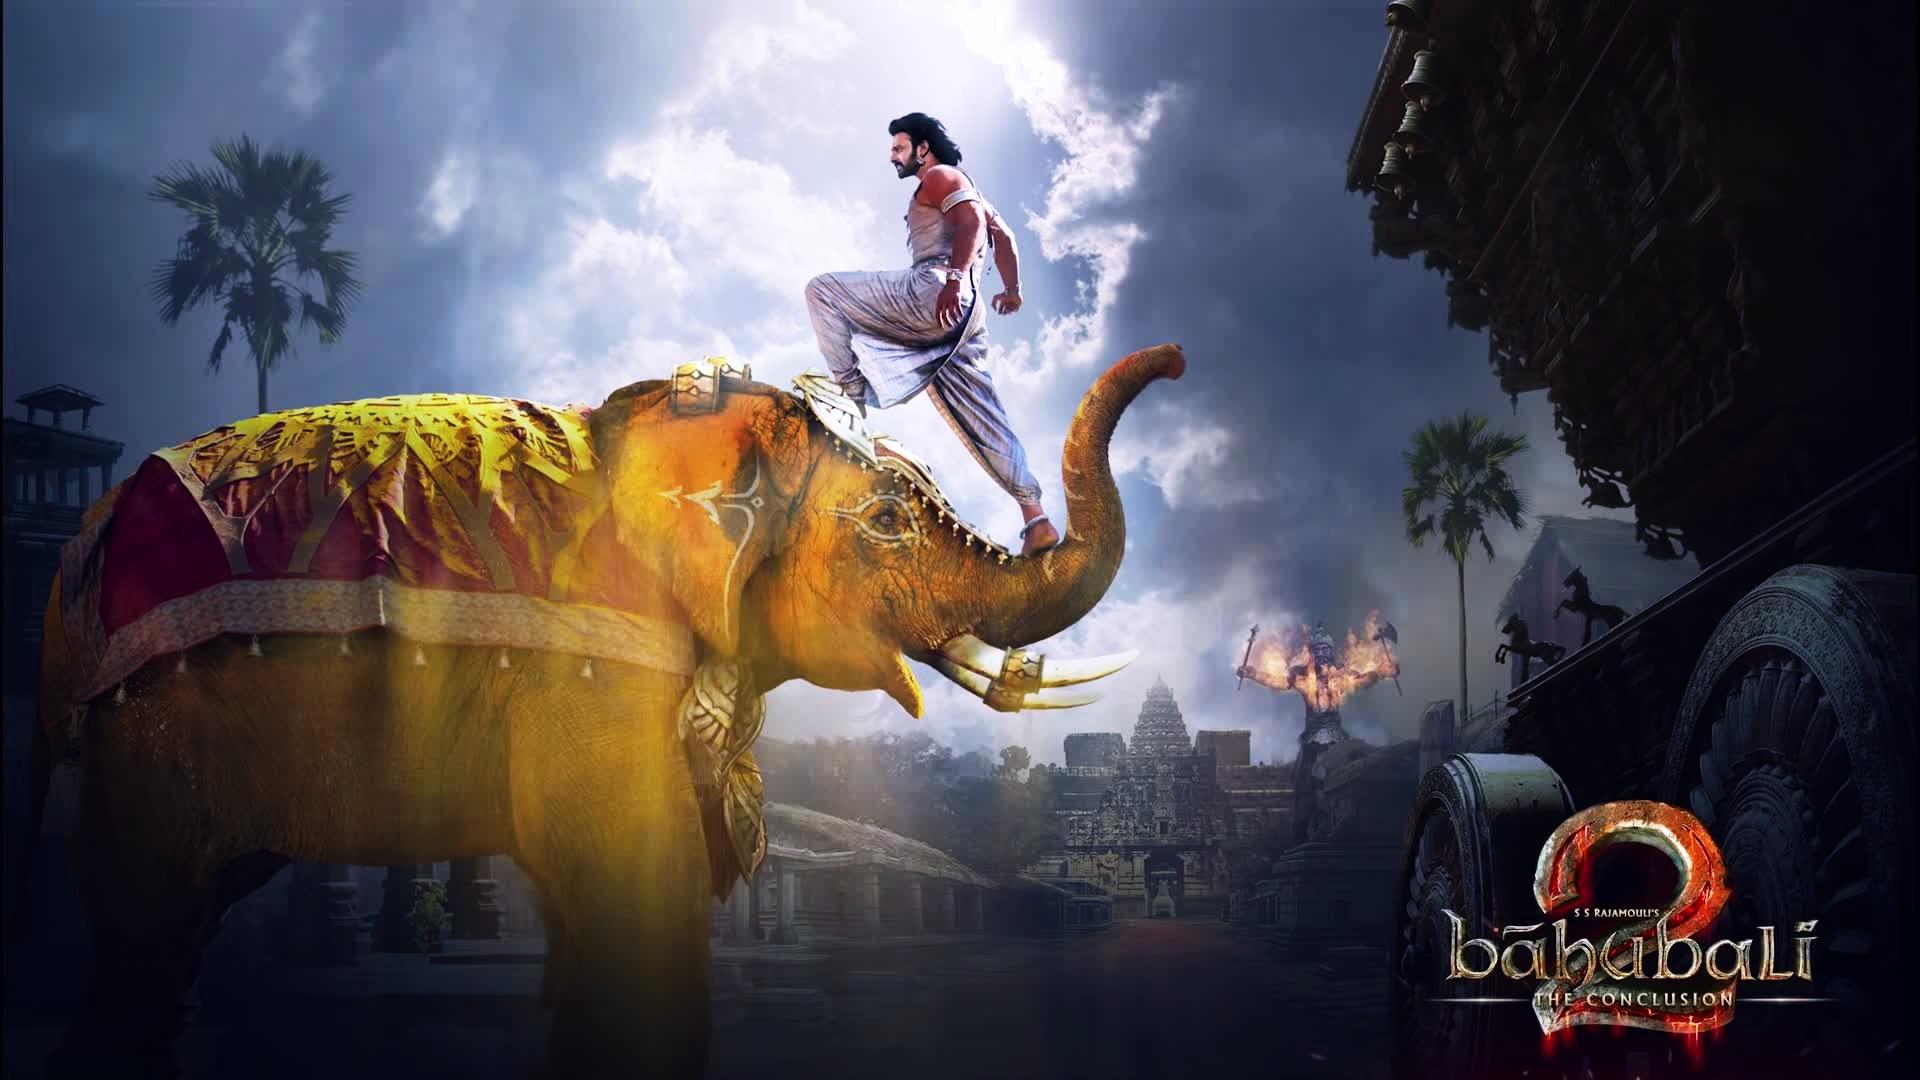 Baahubali 2: The Conclusion HD Wallpaper. Background Image